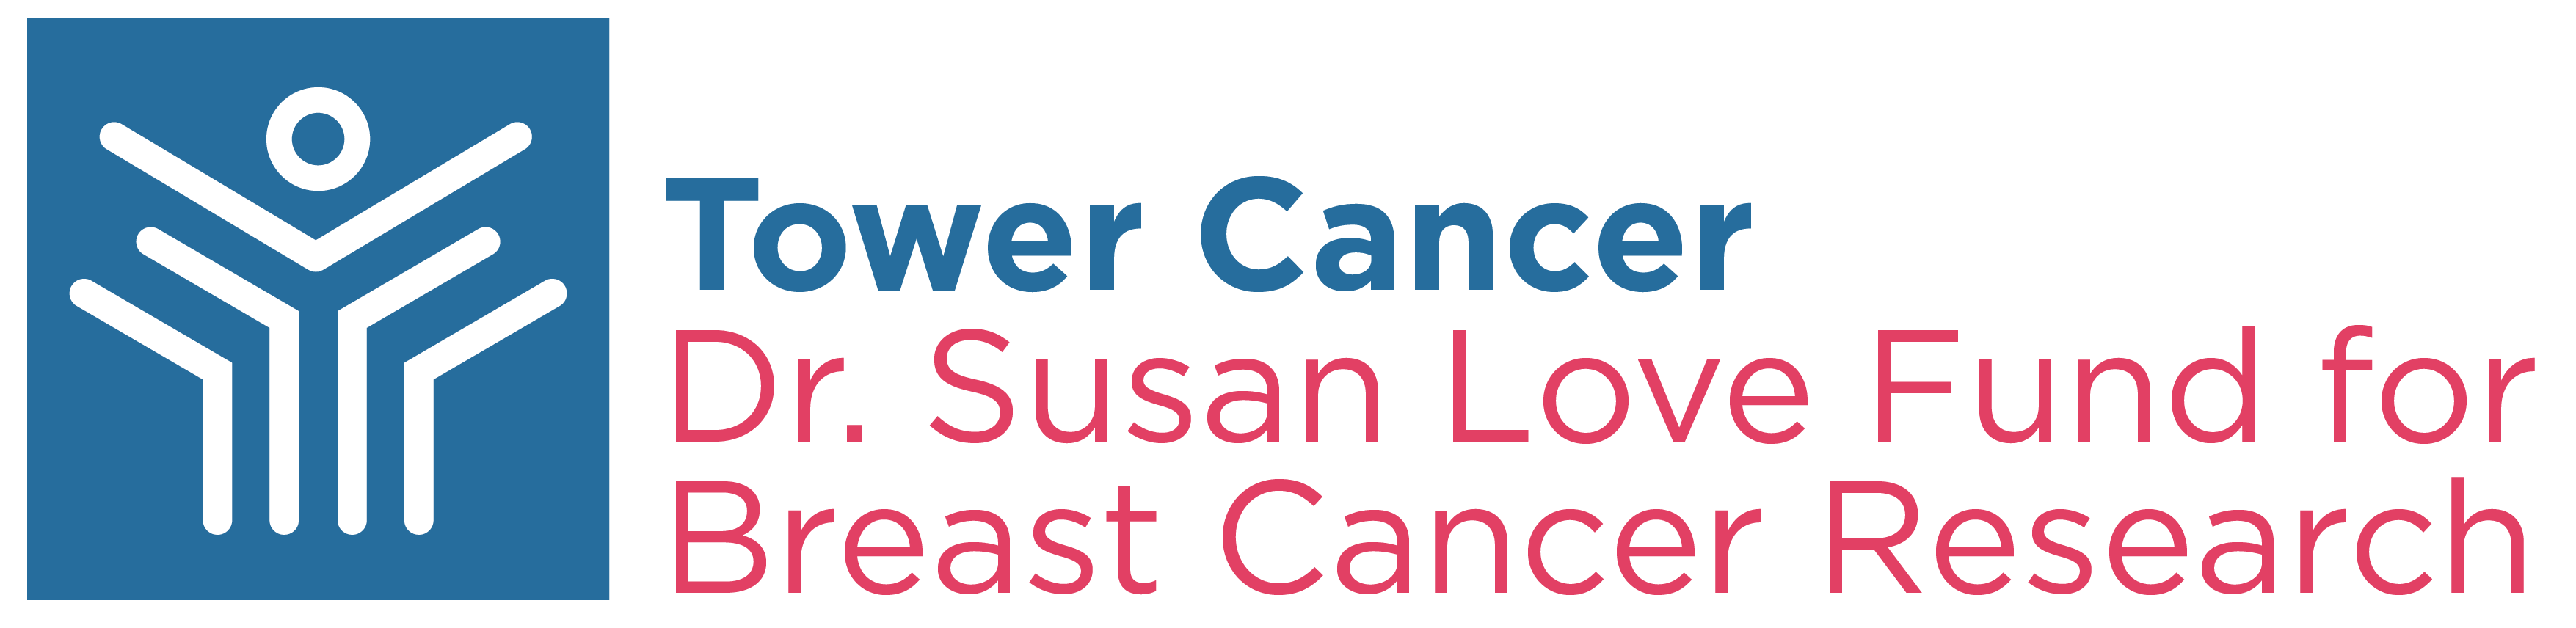 Tower Cancer Research Foundation logo logo